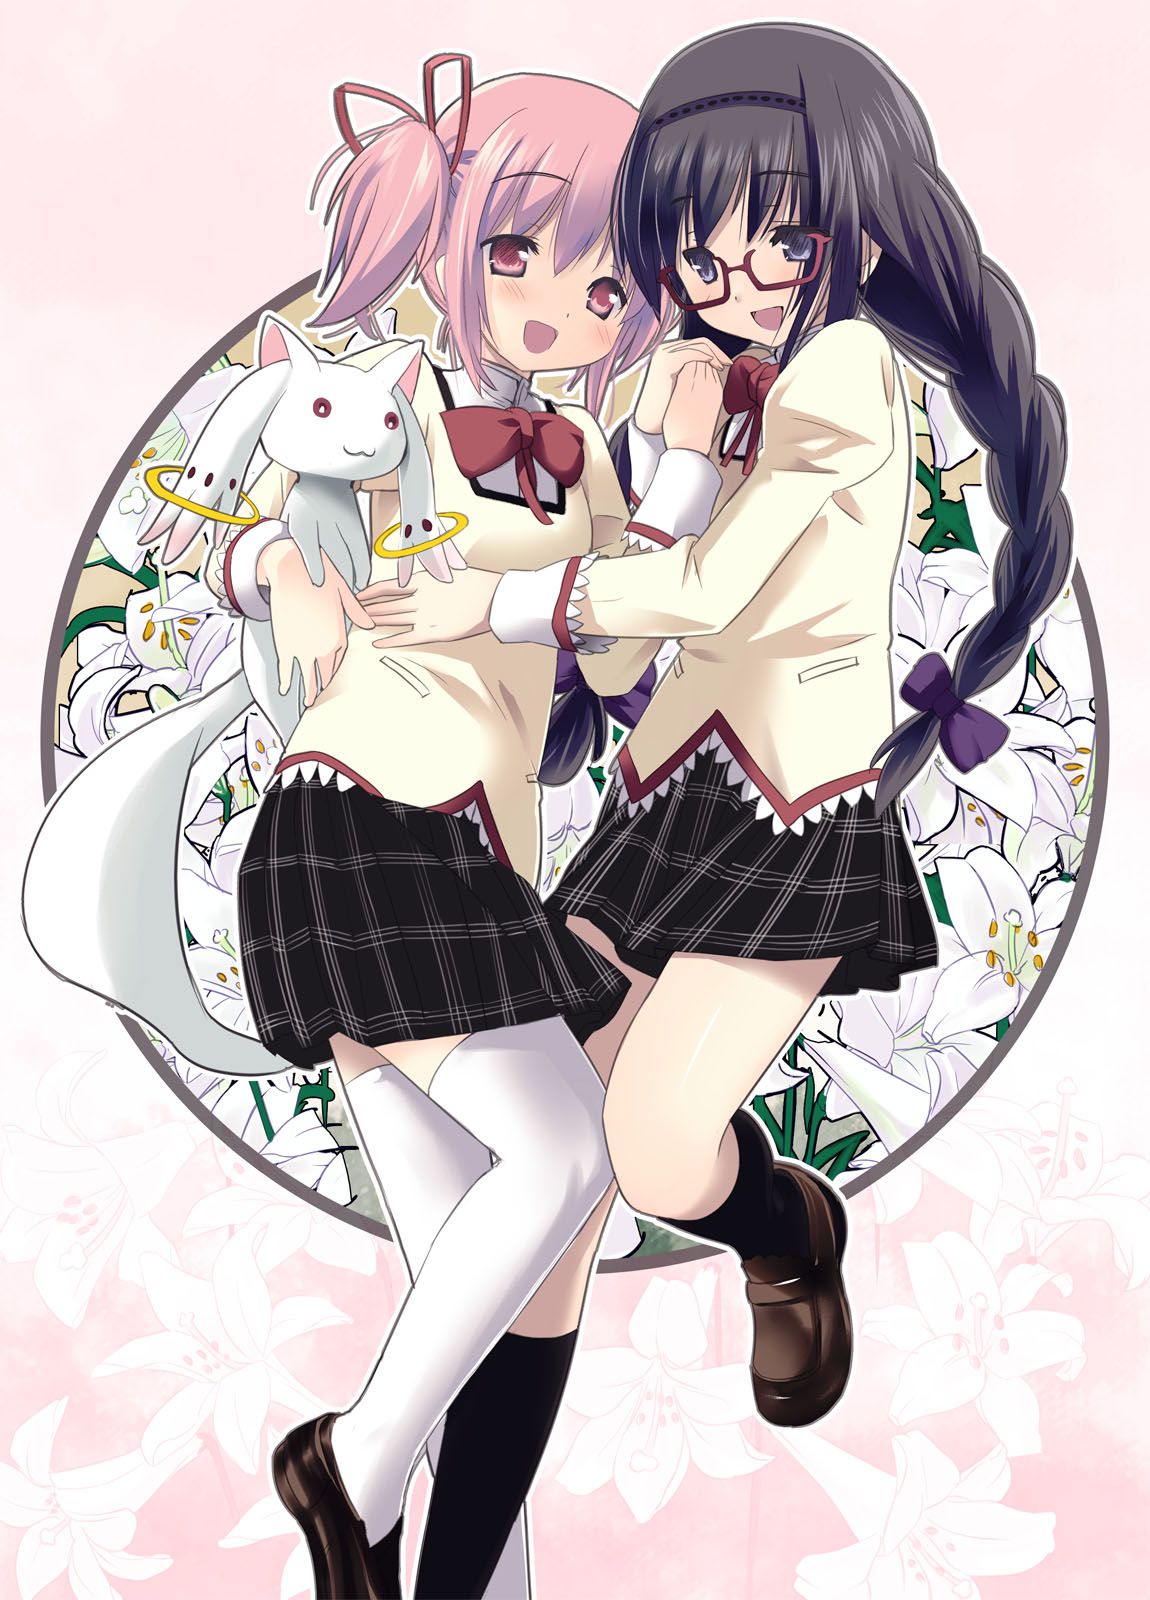 Yuri image once in a while I see with other girls too! 15